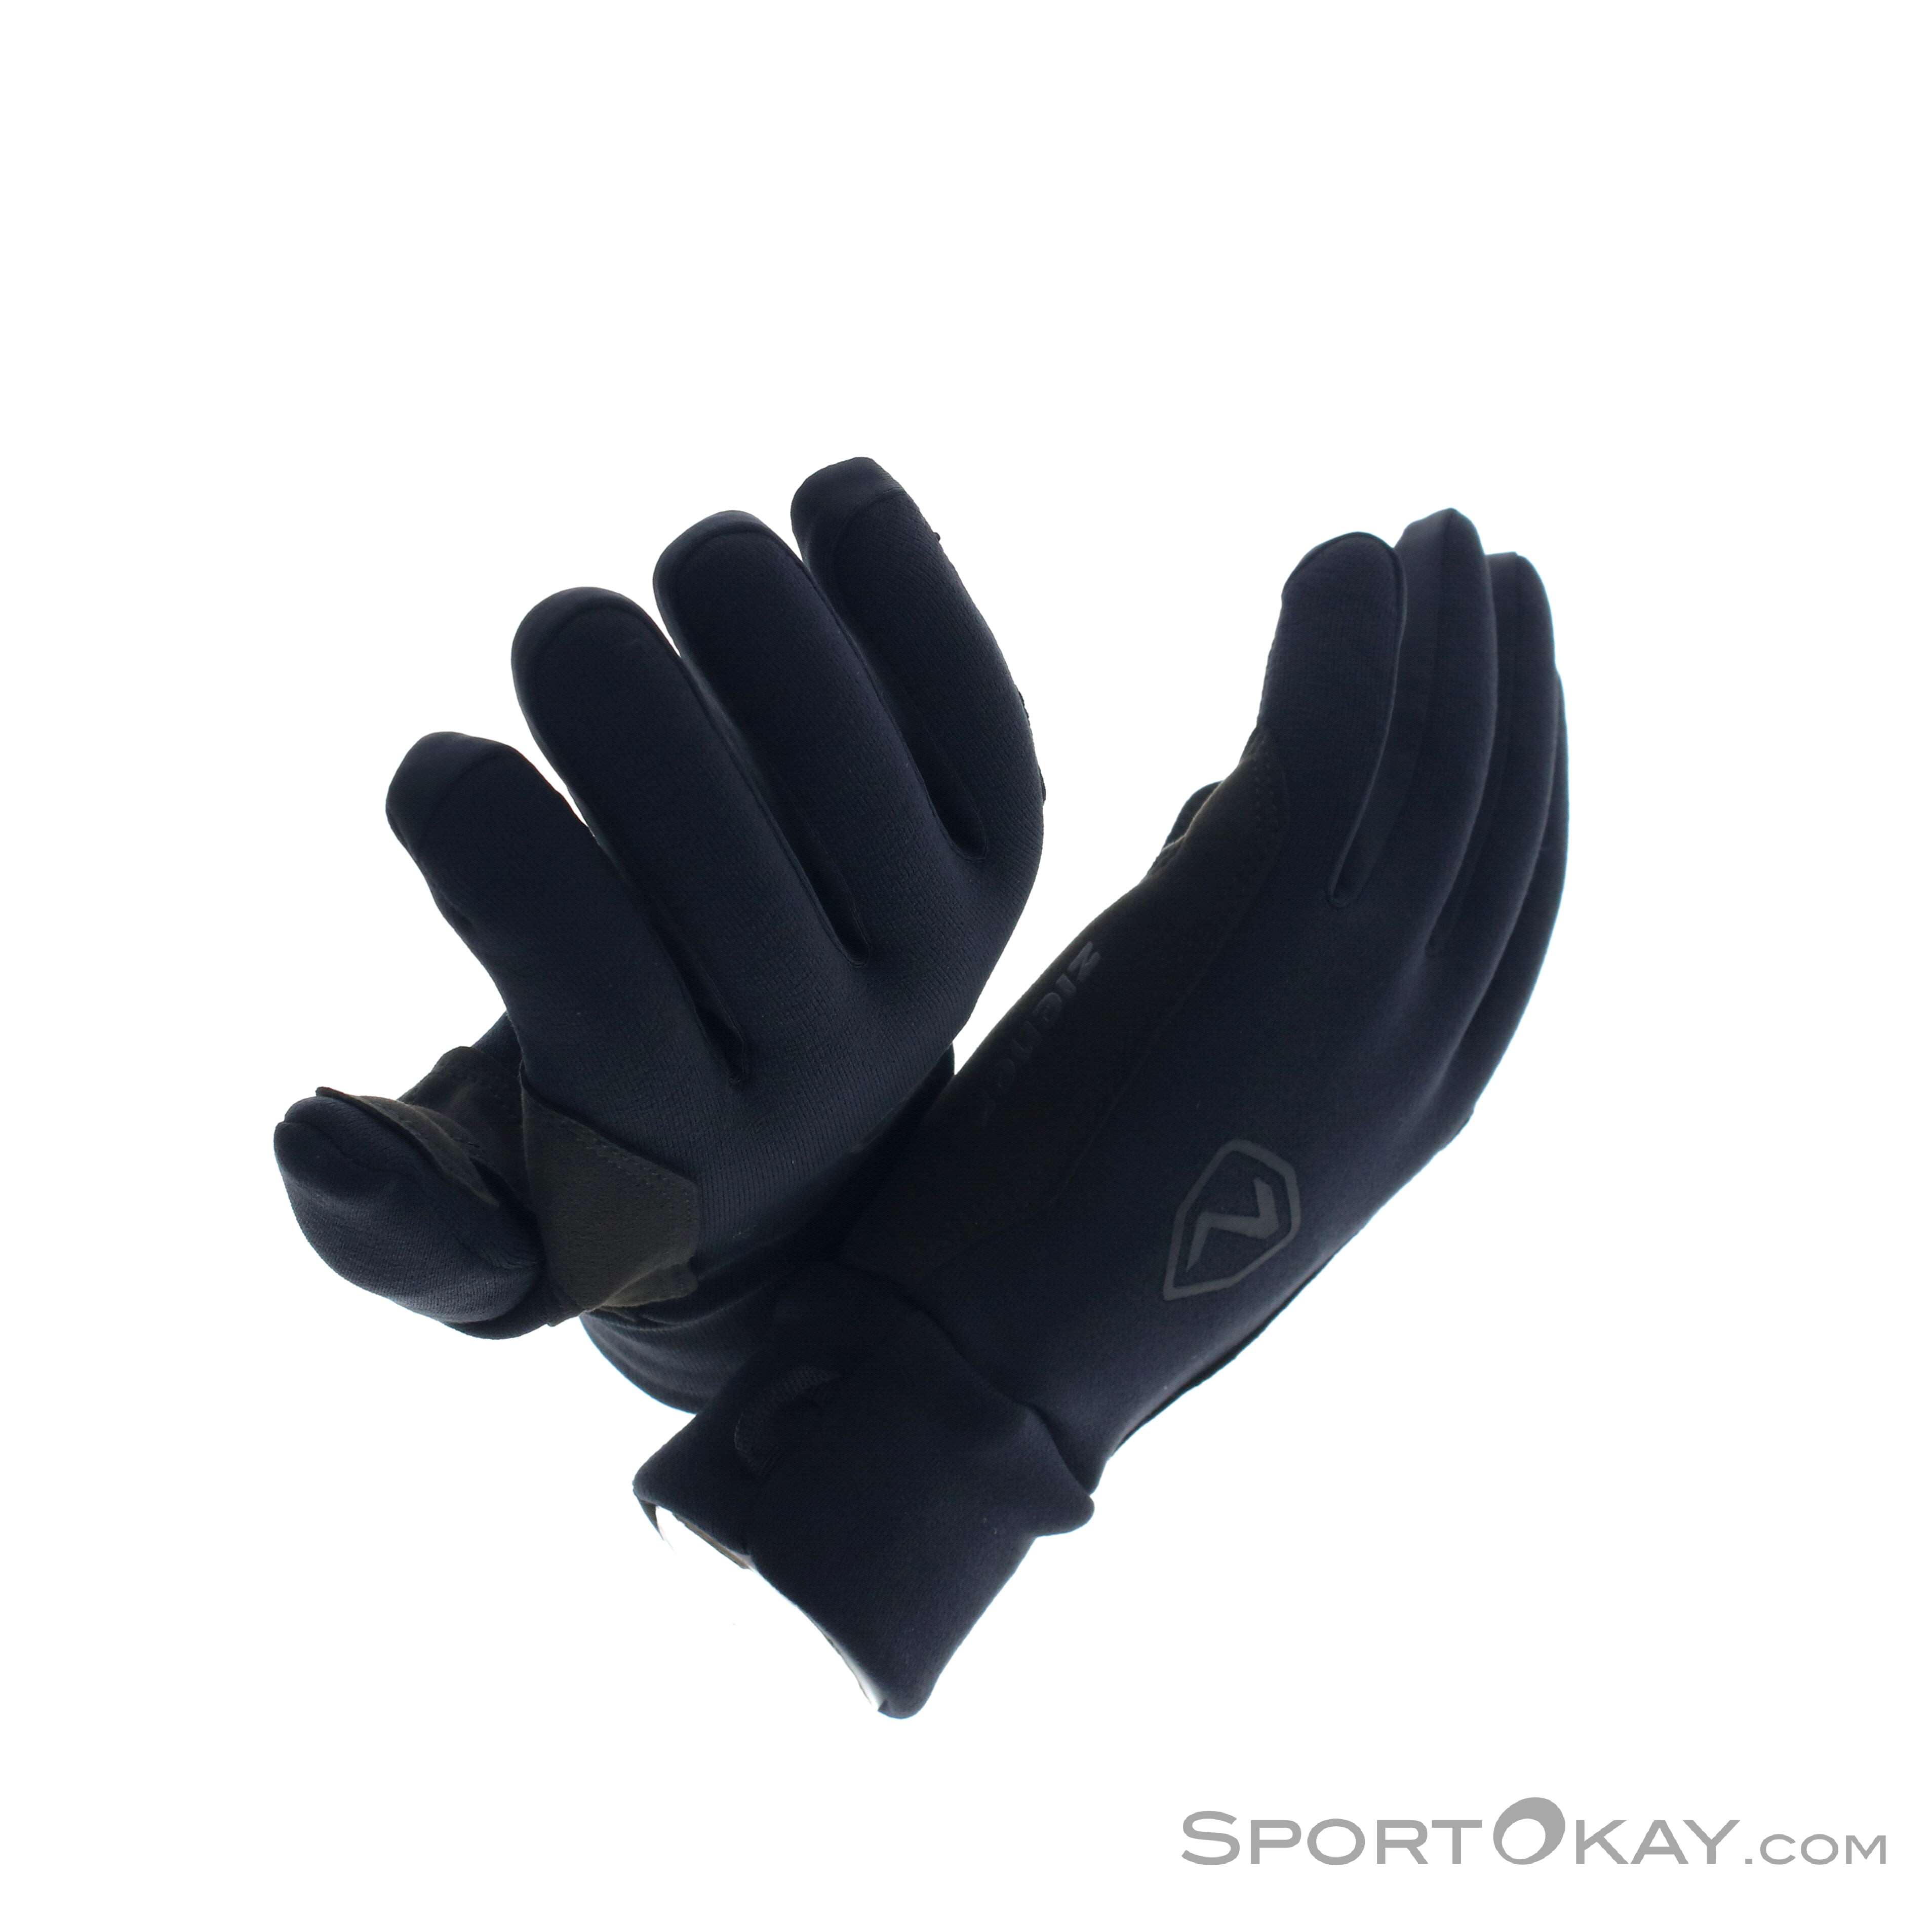 - All Gusty Outdoor Gloves Outdoor - Gloves Ziener - Touch - Clothing